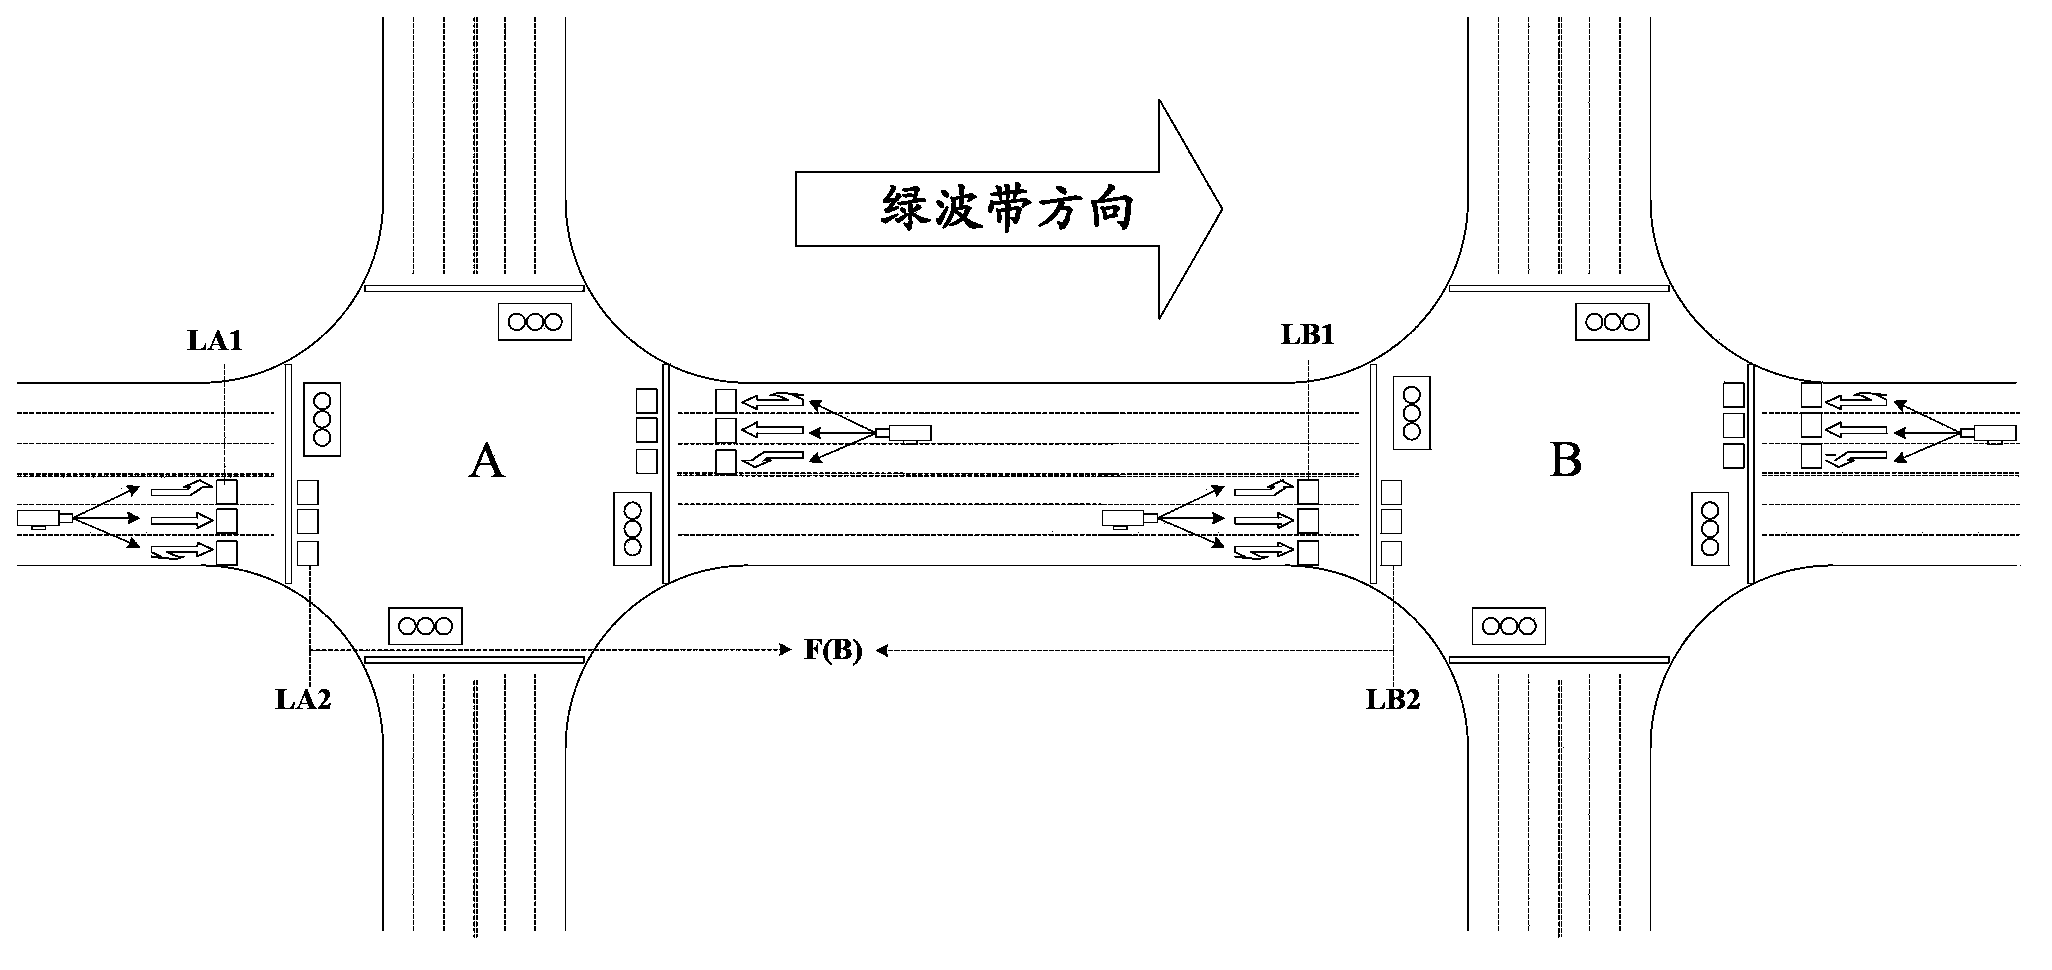 System and method for controlling artery green wave traffic signal based on Internet of Things